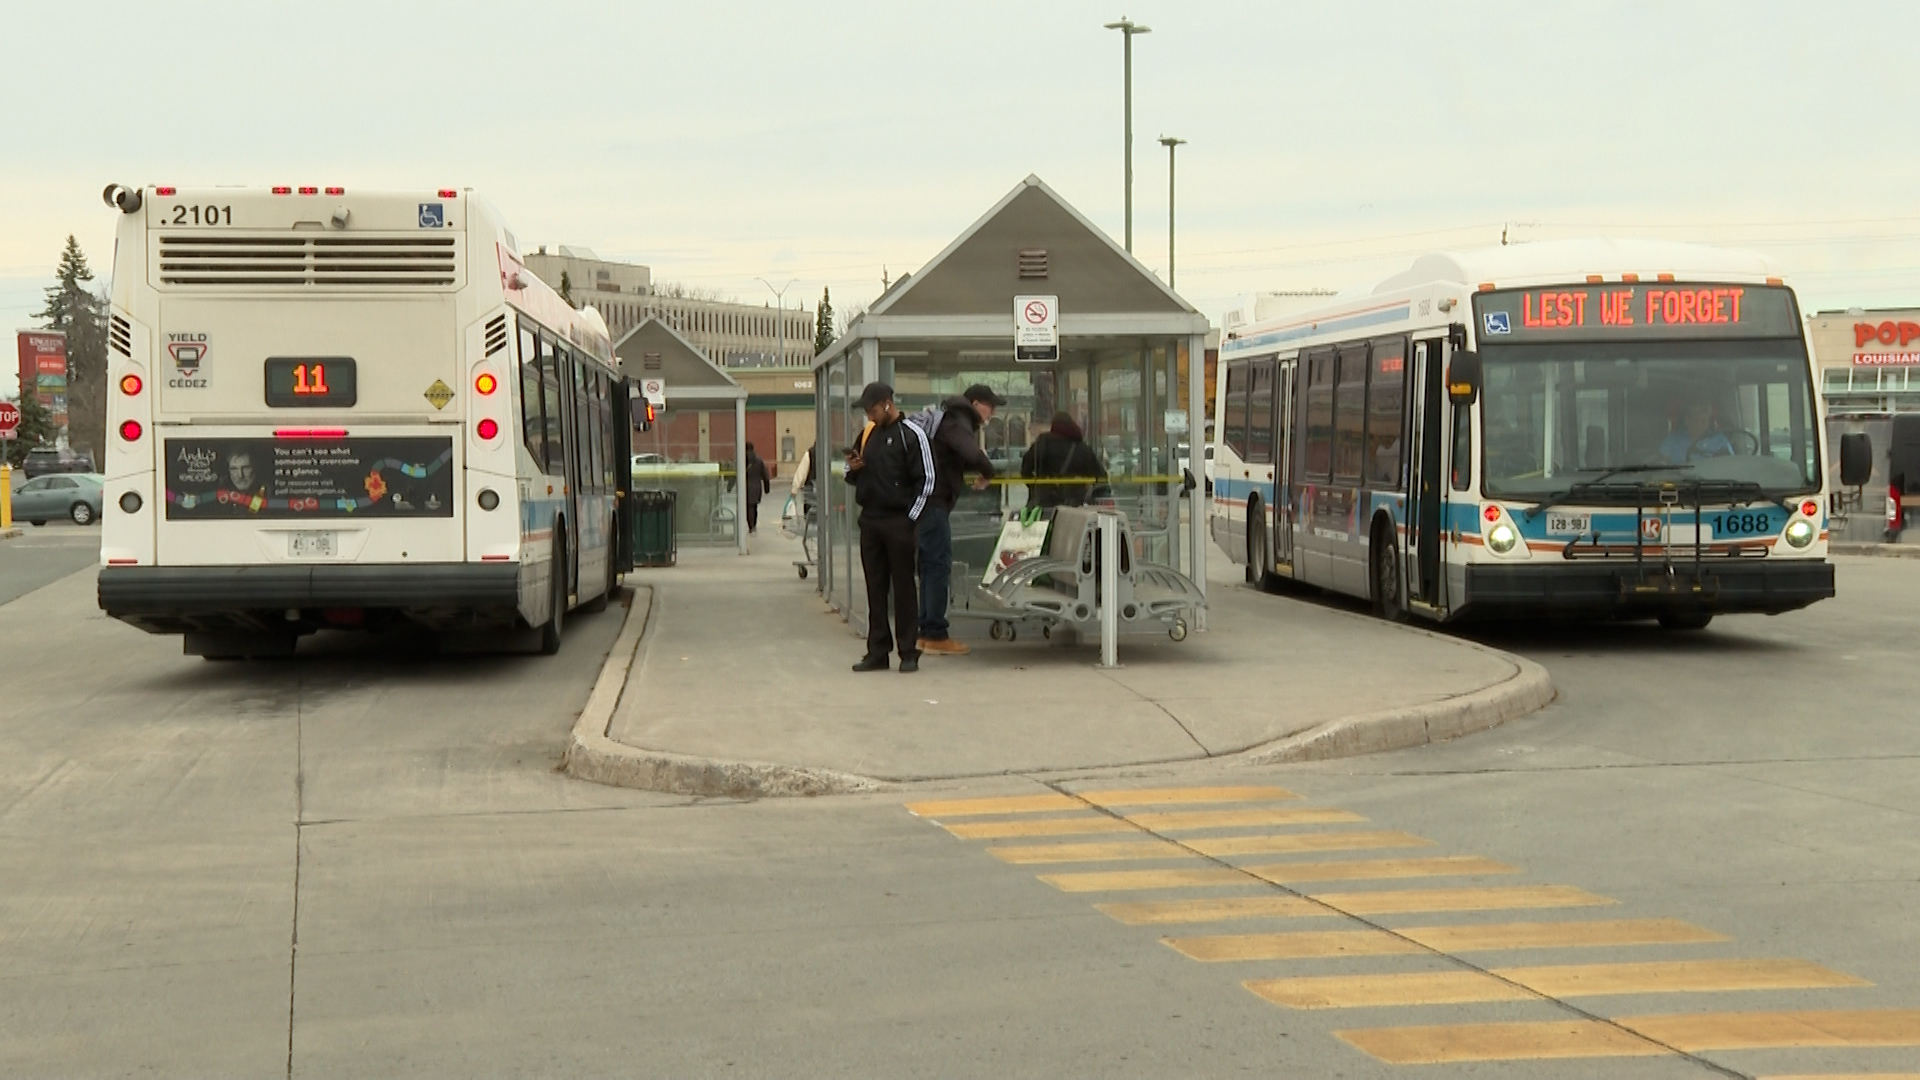 Kingston bus operators are being driven to quit due to abuse: union